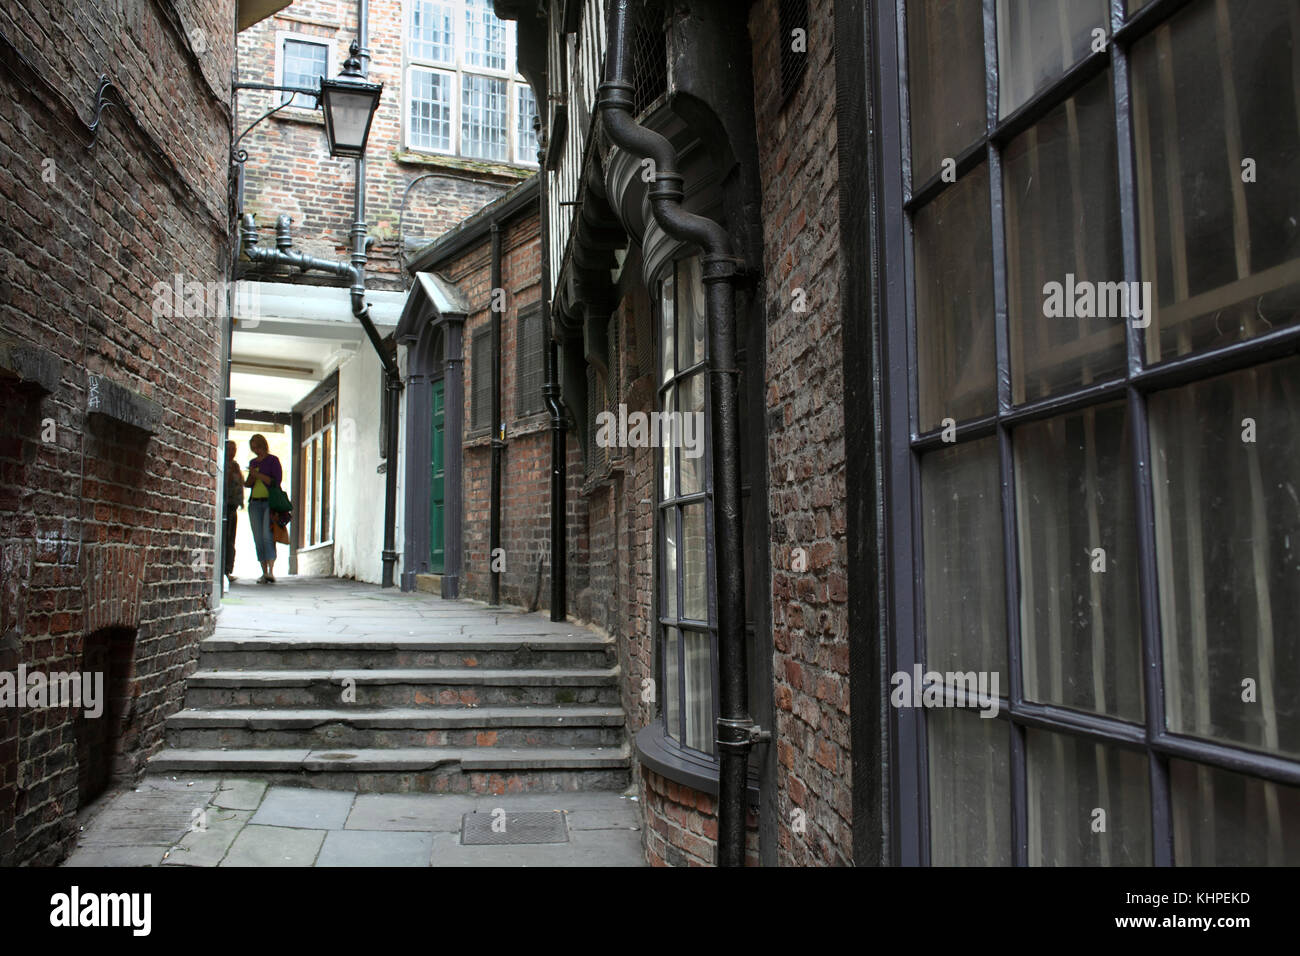 Lady Peckett's Yard, one of many narrow back alleys that thread their way through the city centre of York. Stock Photo